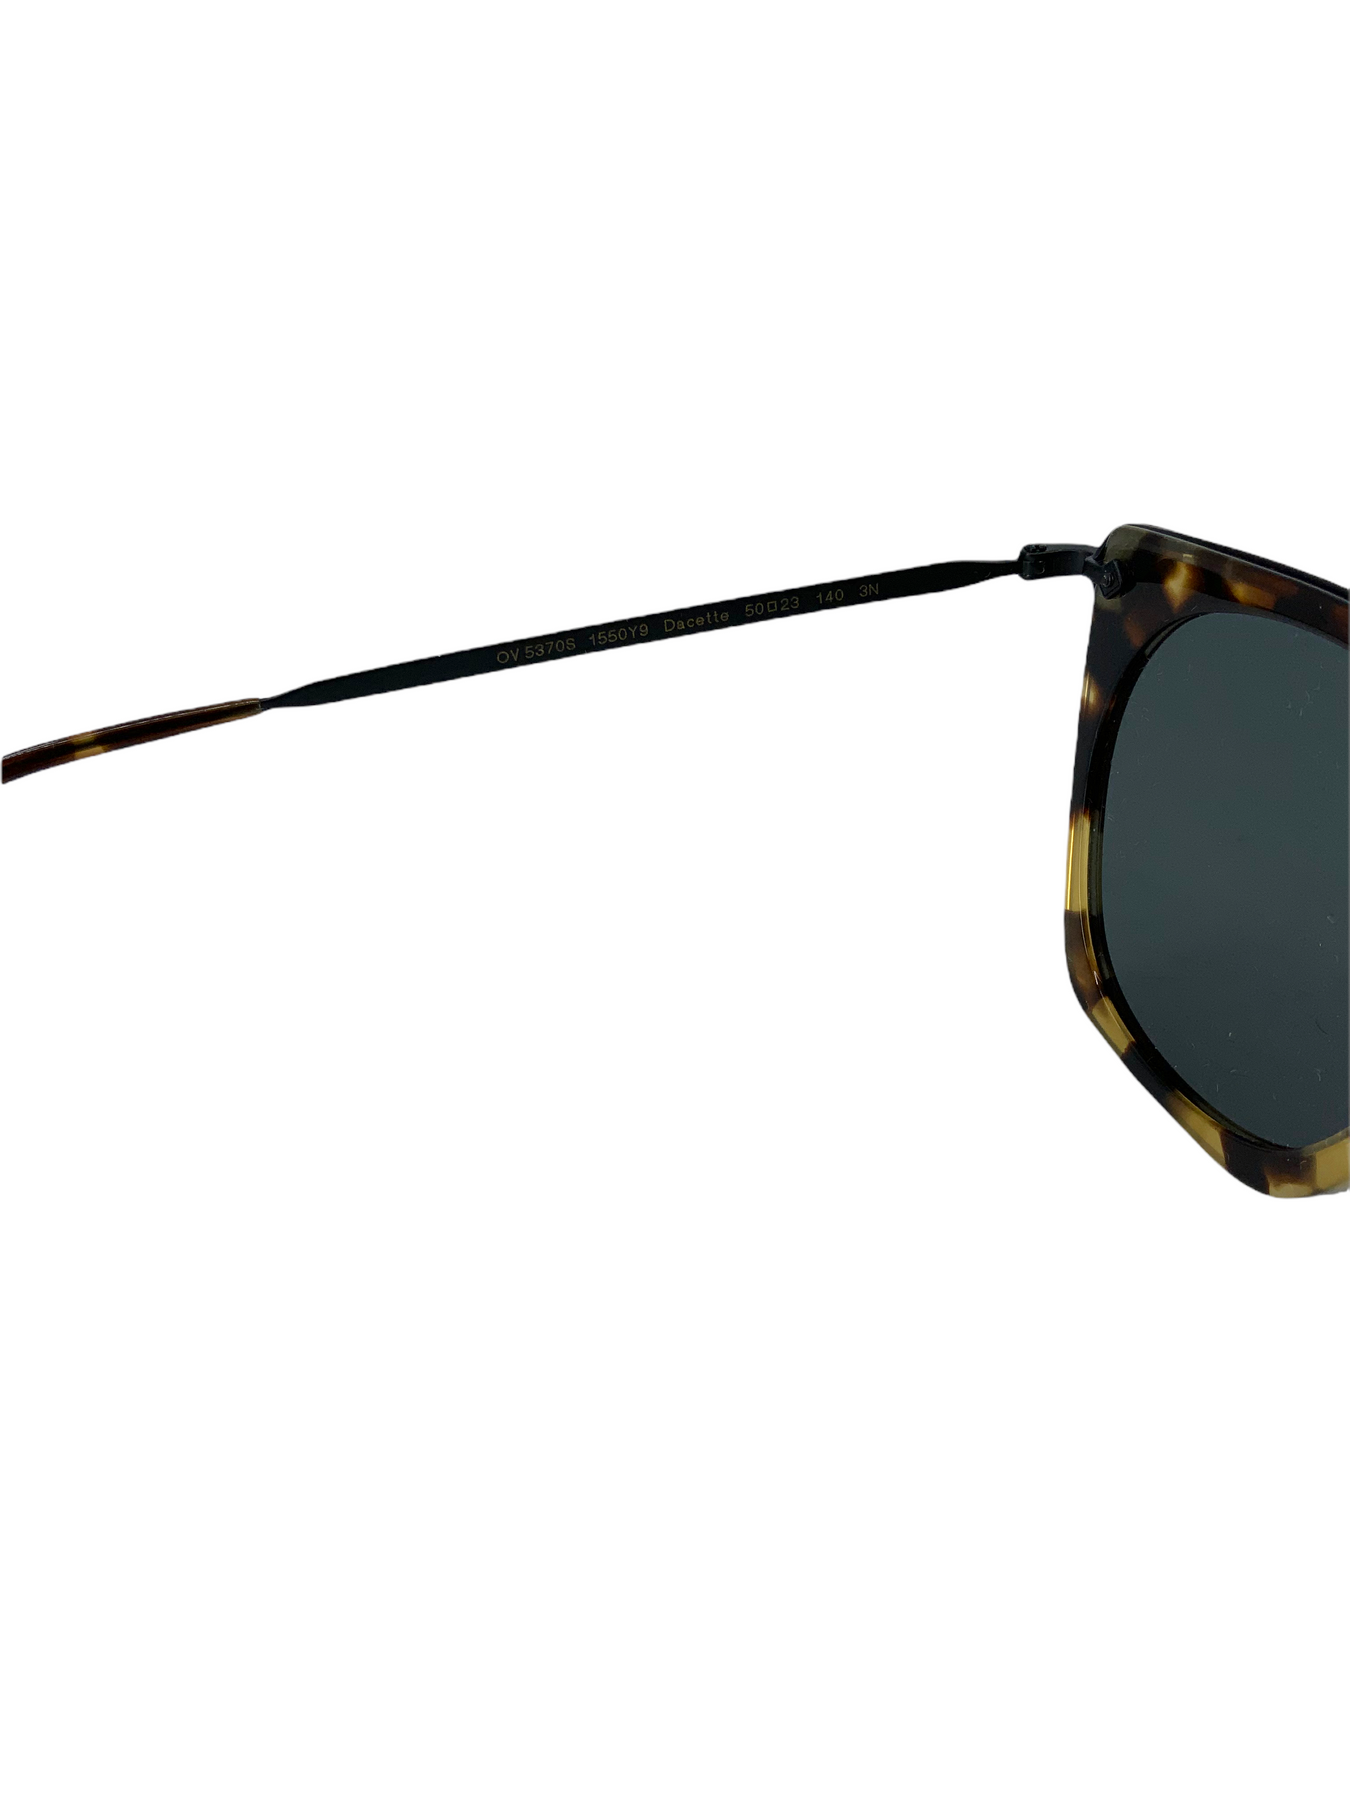 Oliver Peoples Dacette Tortoise Flat Sunglasses - Consigned Designs